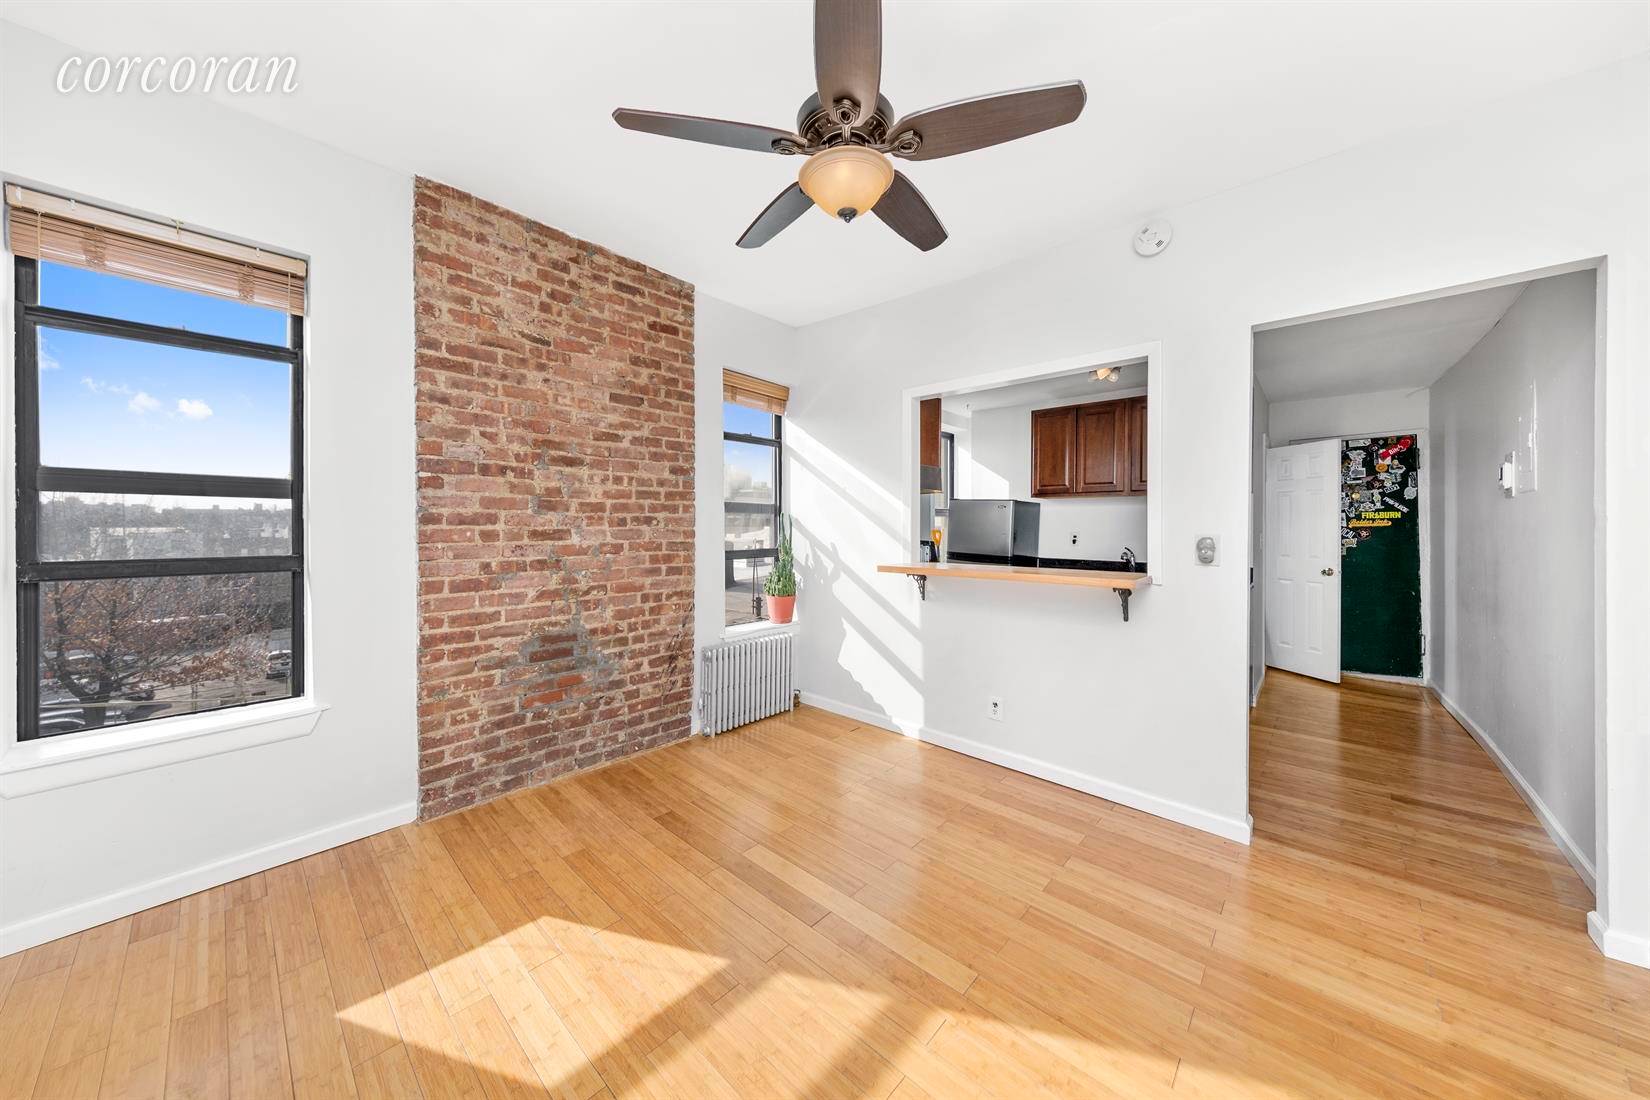 Gut renovated co op available at 534 Graham Avenue in Greenpoint.